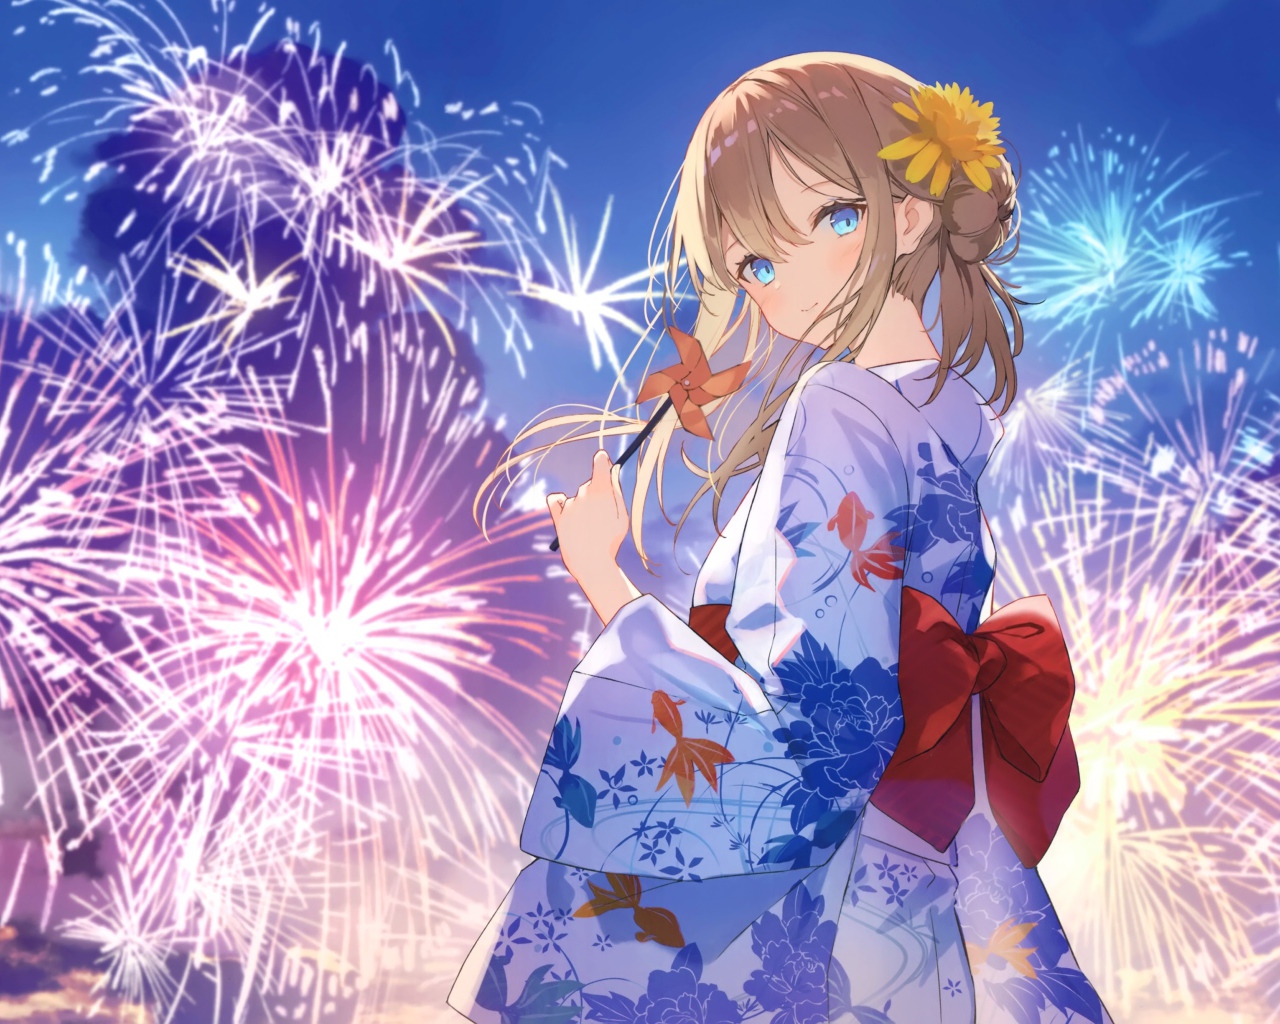 Beautiful anime girl in kimono on the background of fireworks